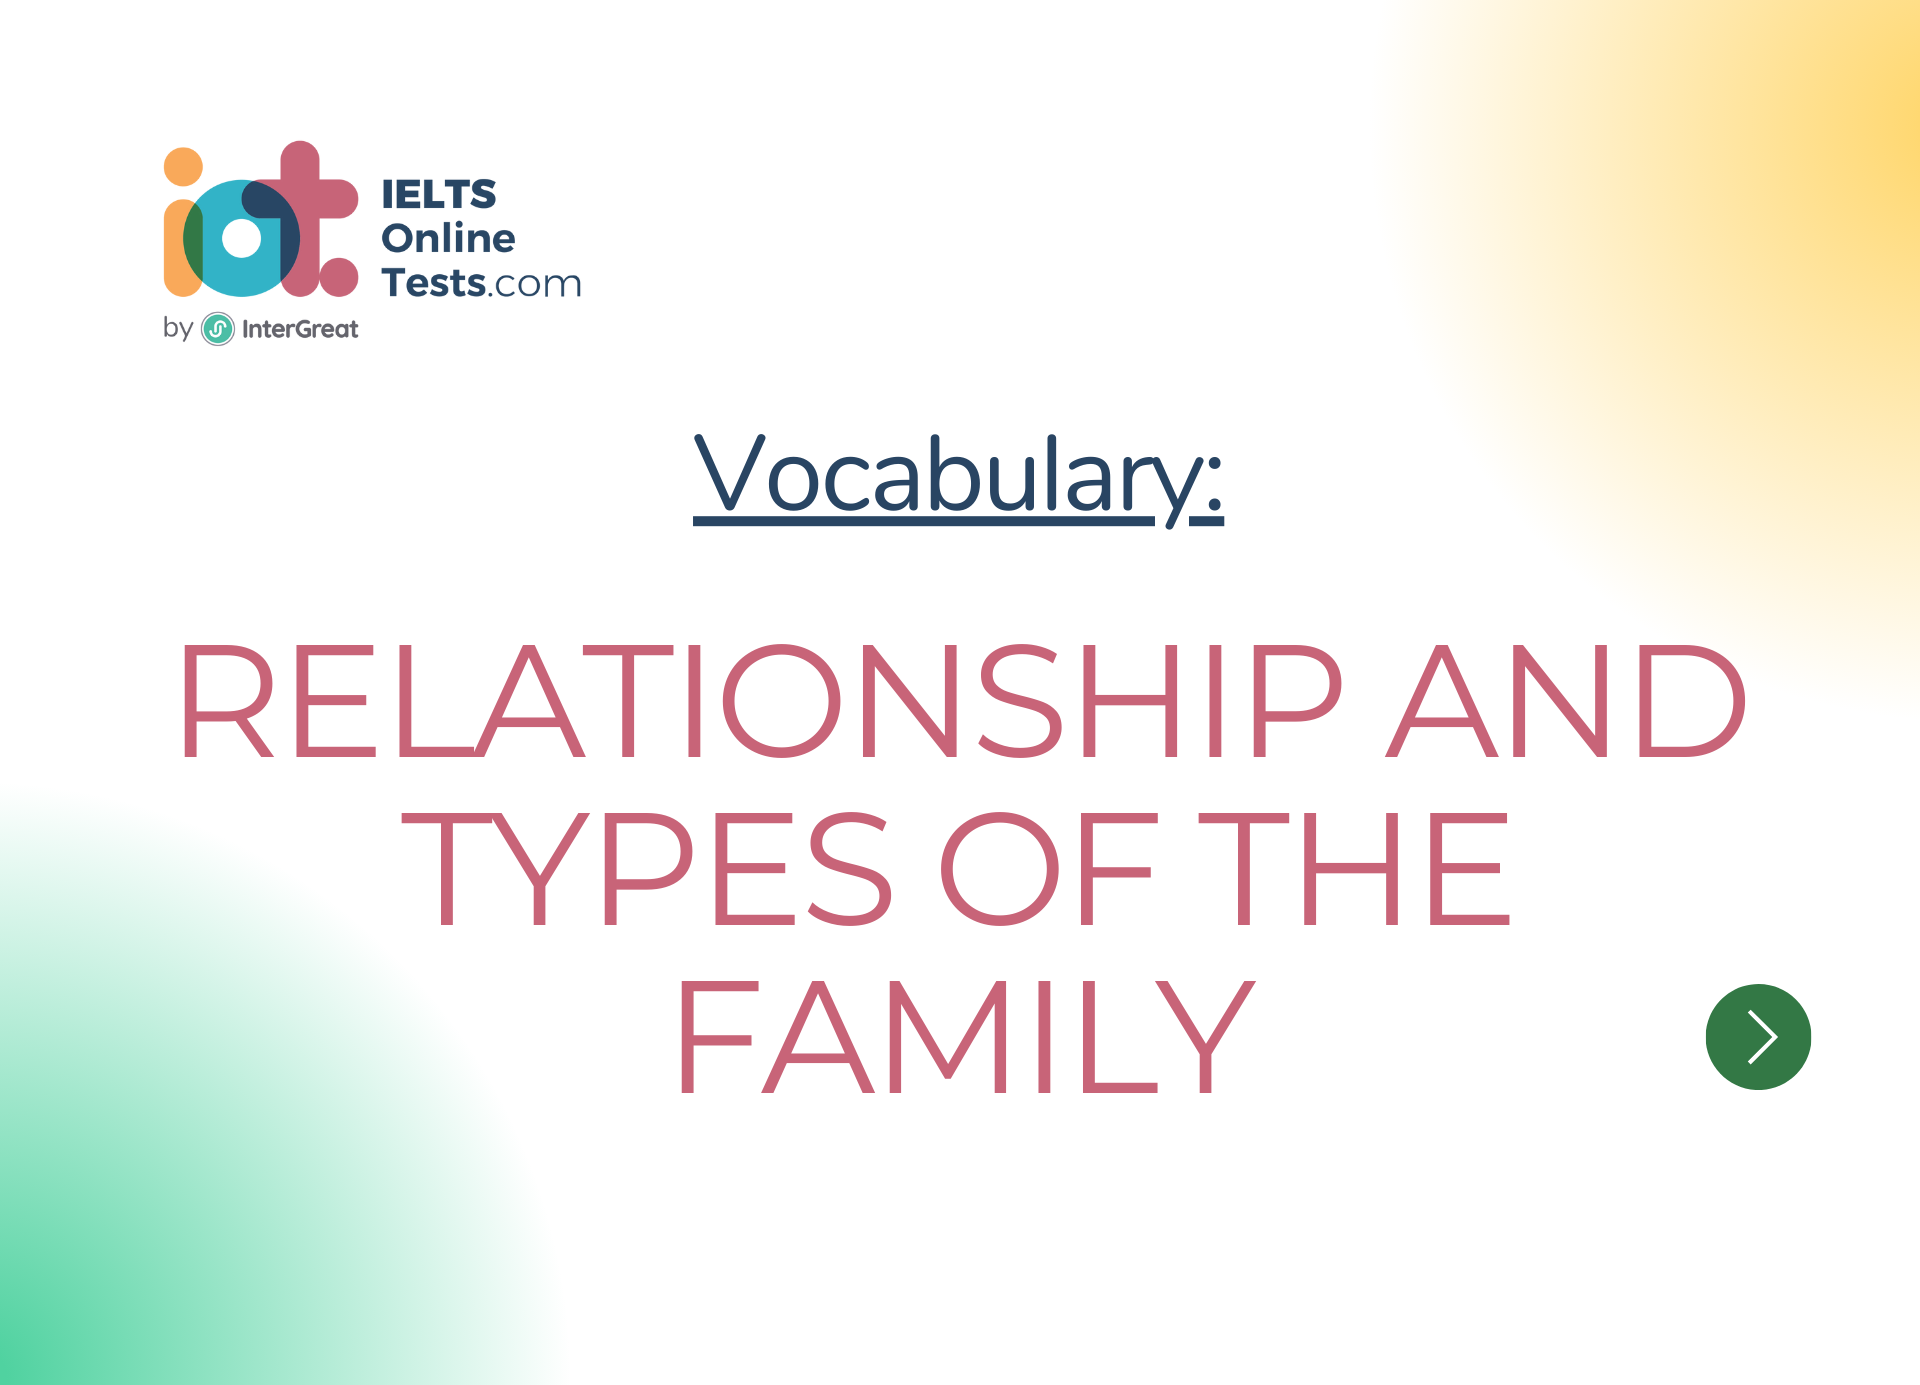 Relationship and types of the family